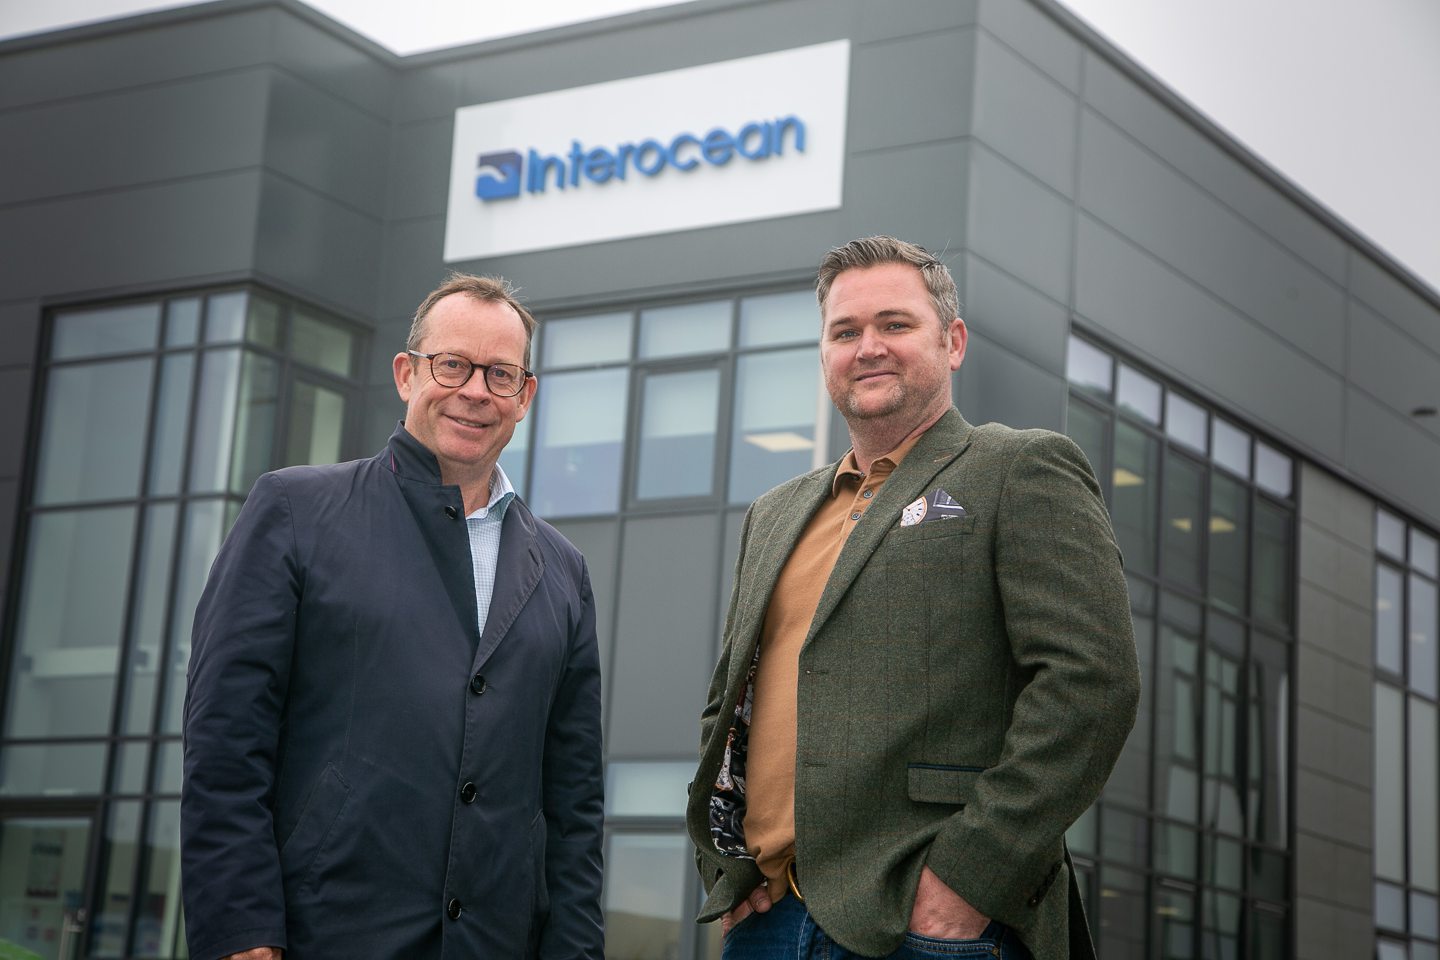 Interocean aims for growth and opens new base in Aberdeen